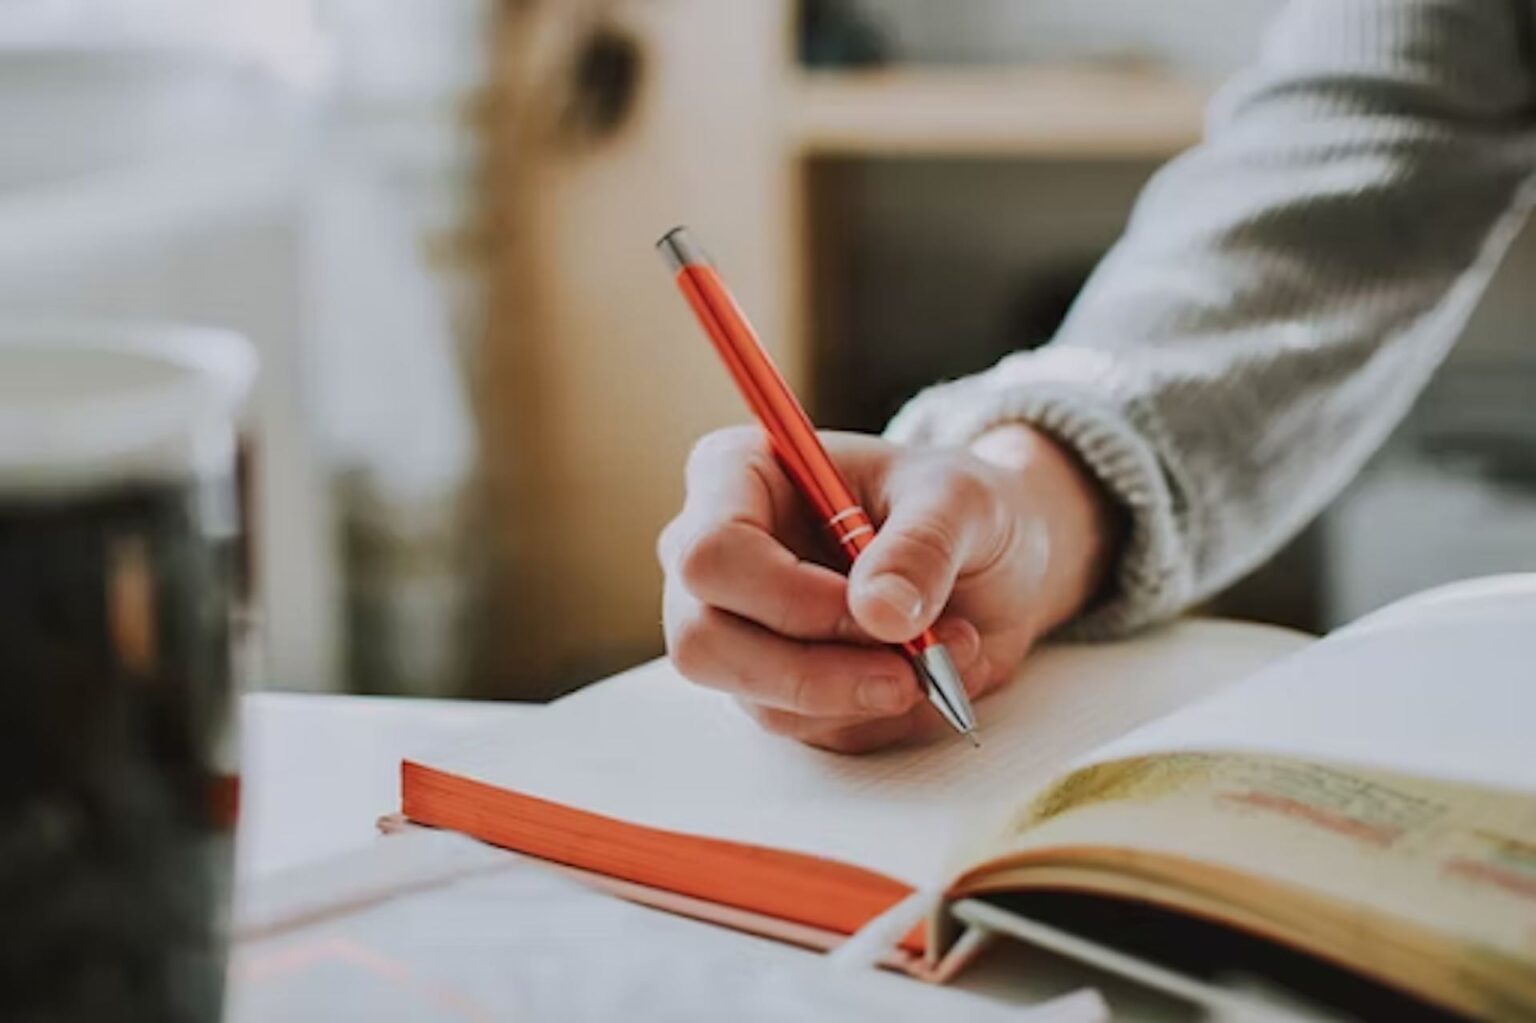 A standout college essay isn’t just about writing well, discover this small guide to writing an exceptional essay. Here's all you need to know.